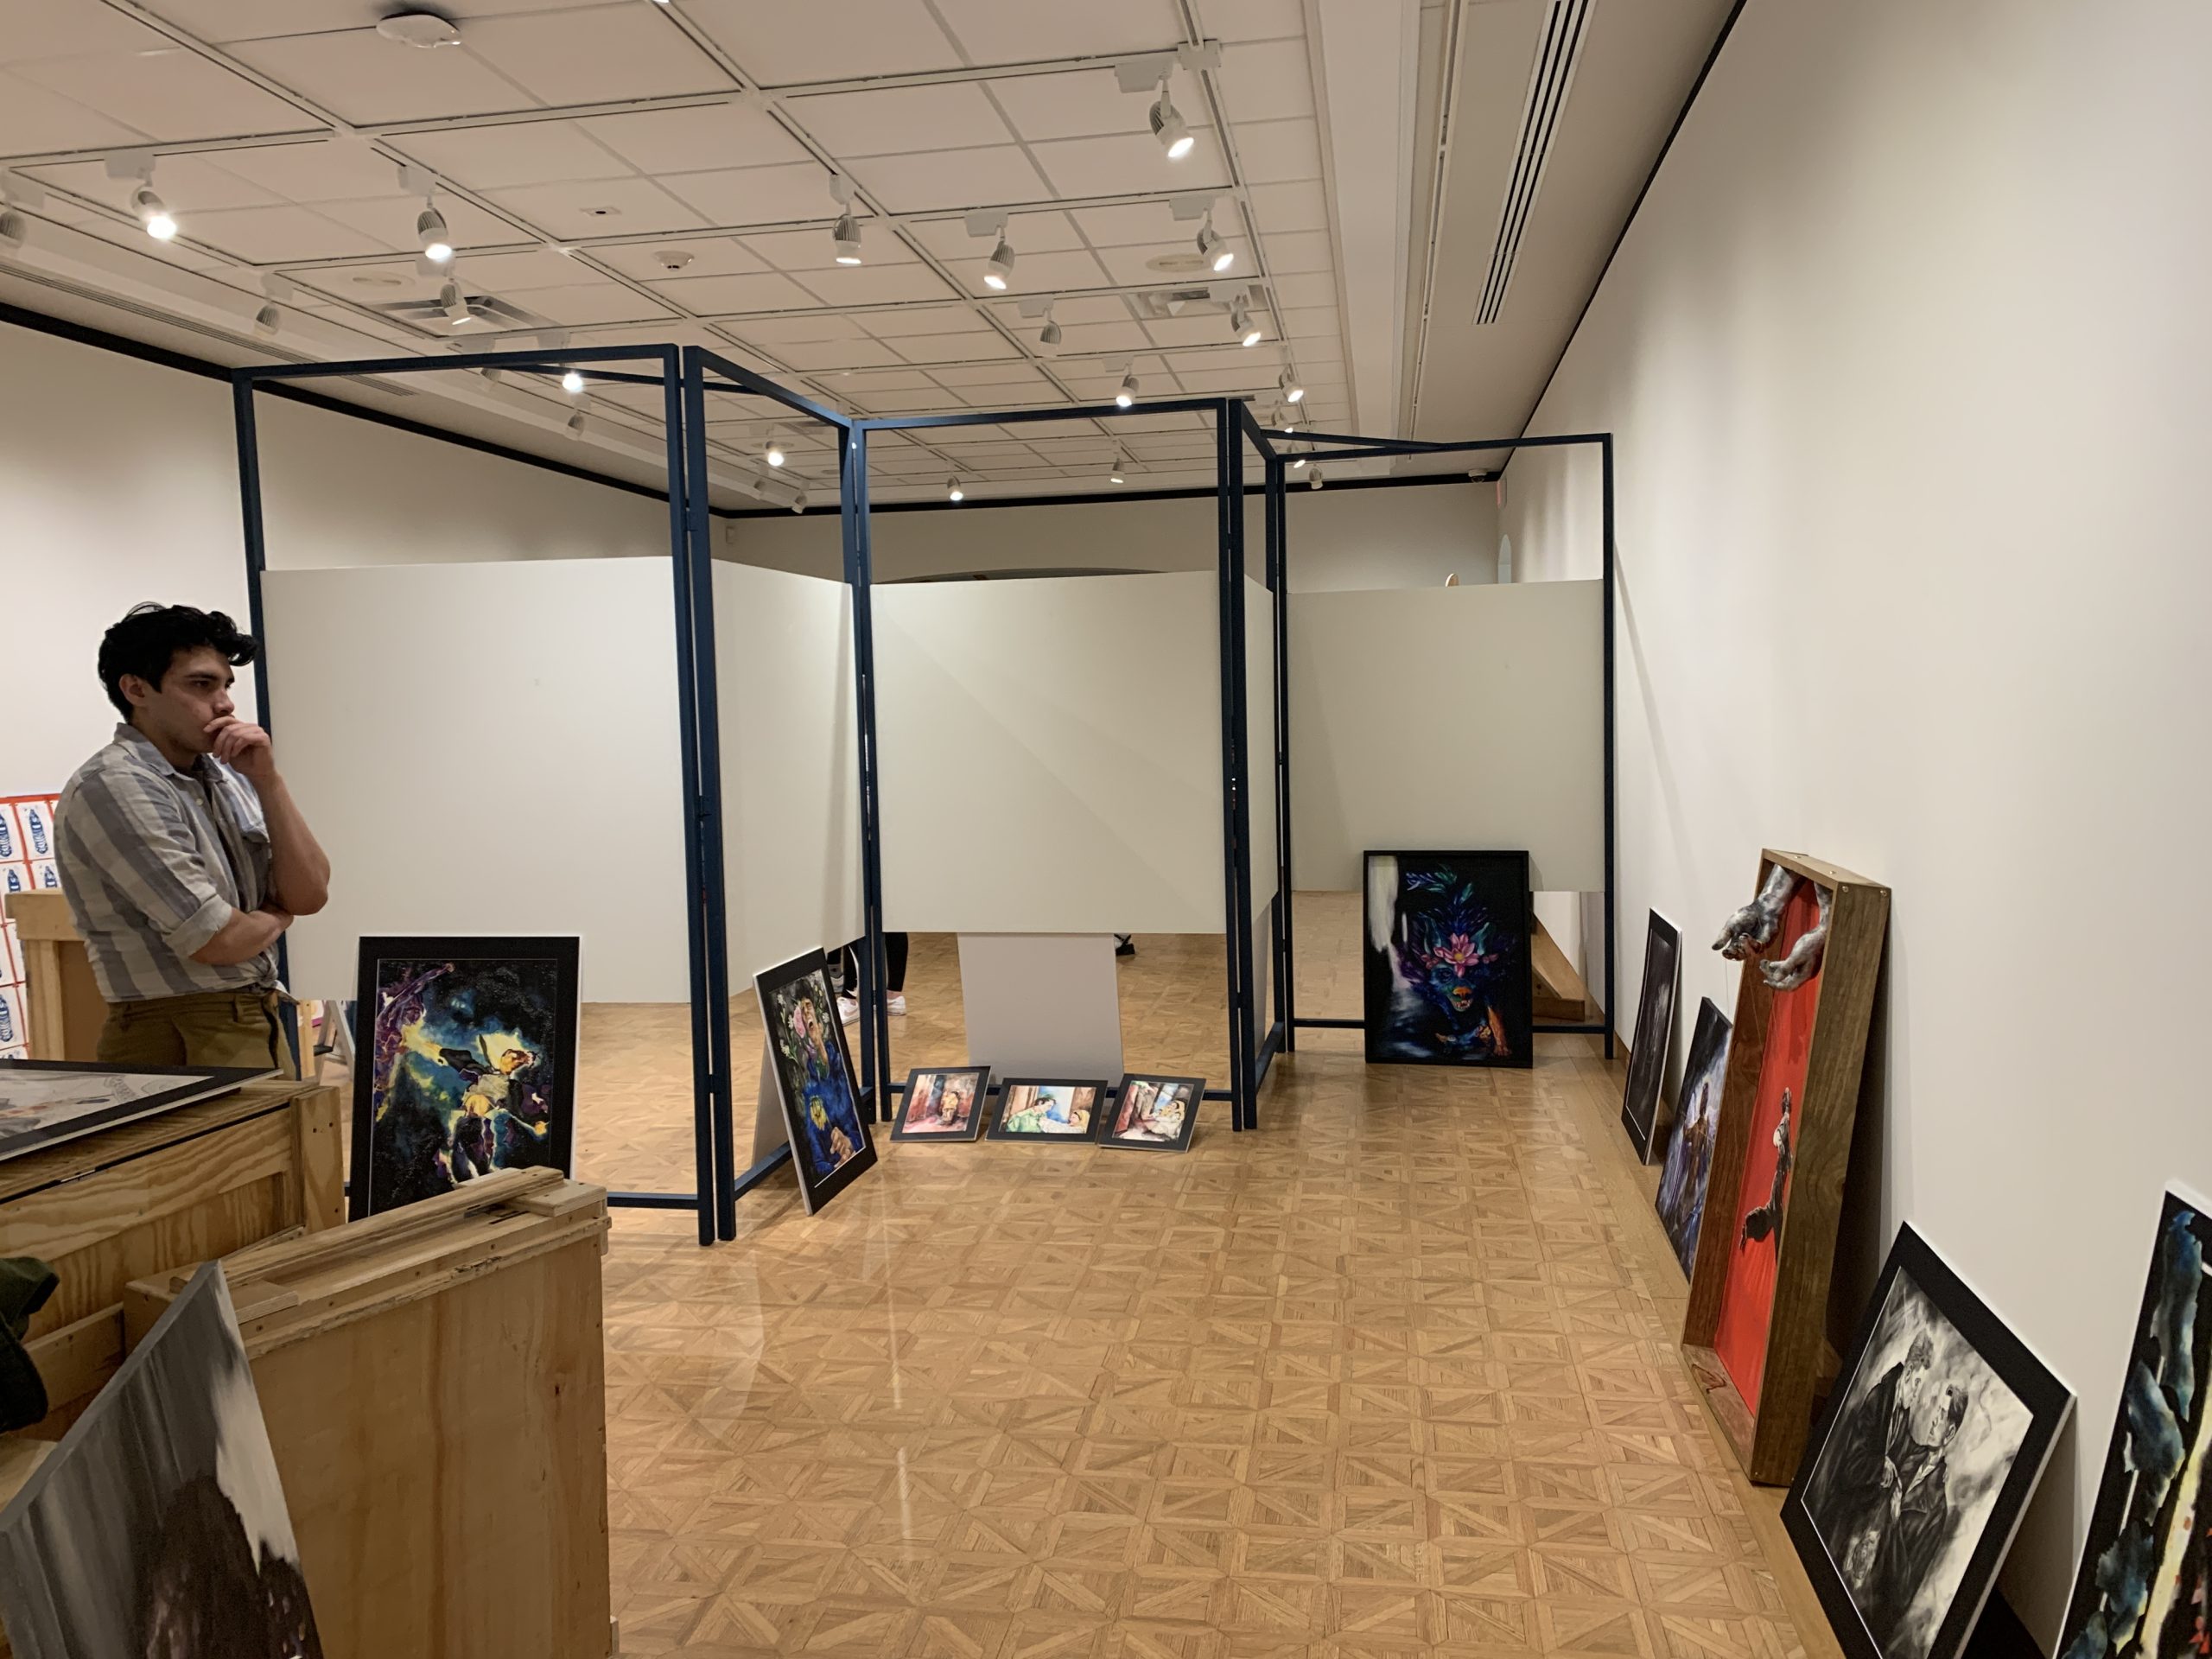 A high school student stands with a hand over his mouth, contemplating the paintings that surround him on the floor. He is preparing to place and hang artwork in the gallery space.